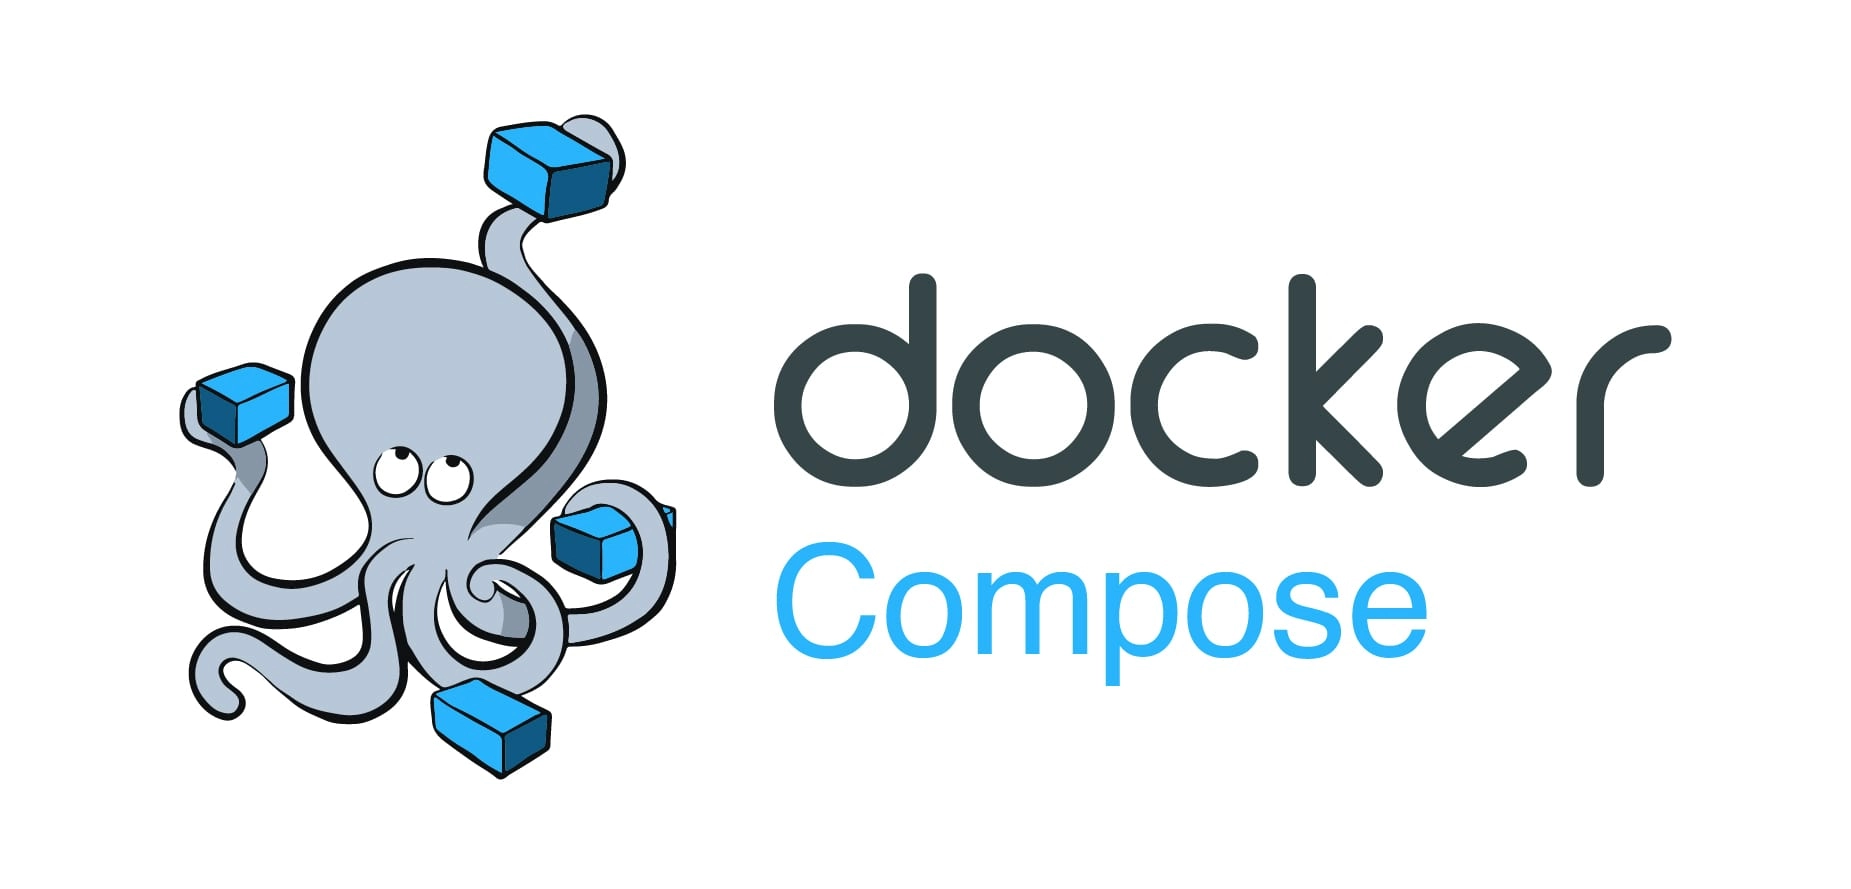 Tutorial on how to deploy a Nuxt 3 application with docker compose and nginx. 